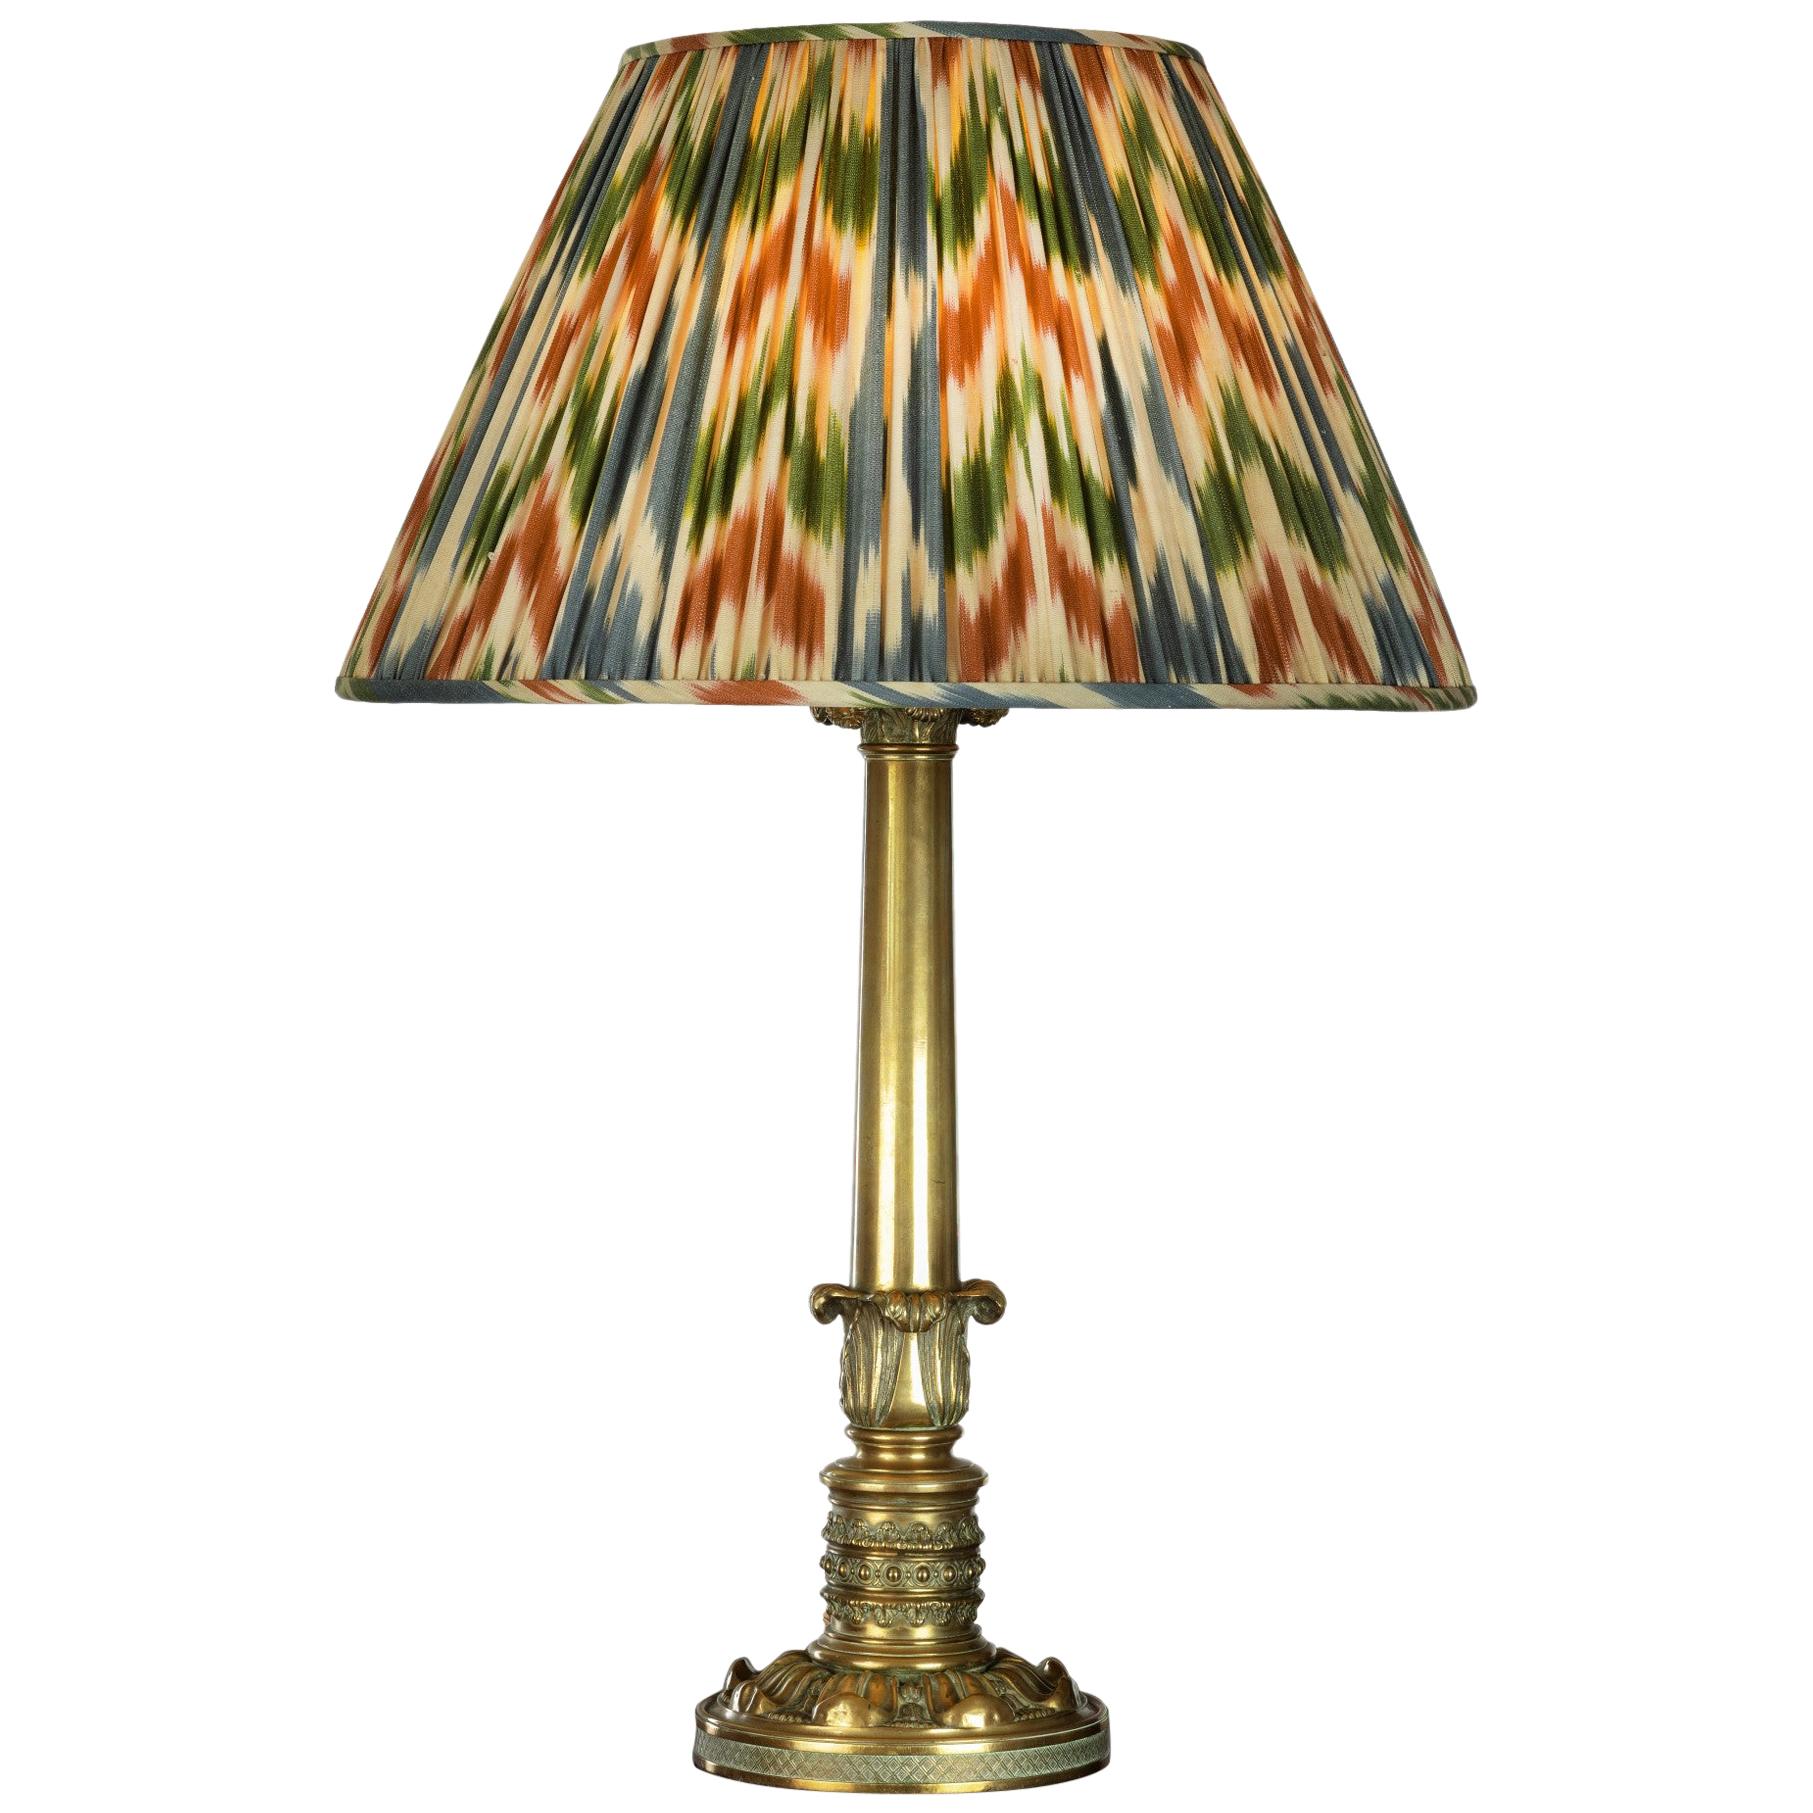 Regency Brass Table Lamp with Ikat Shade